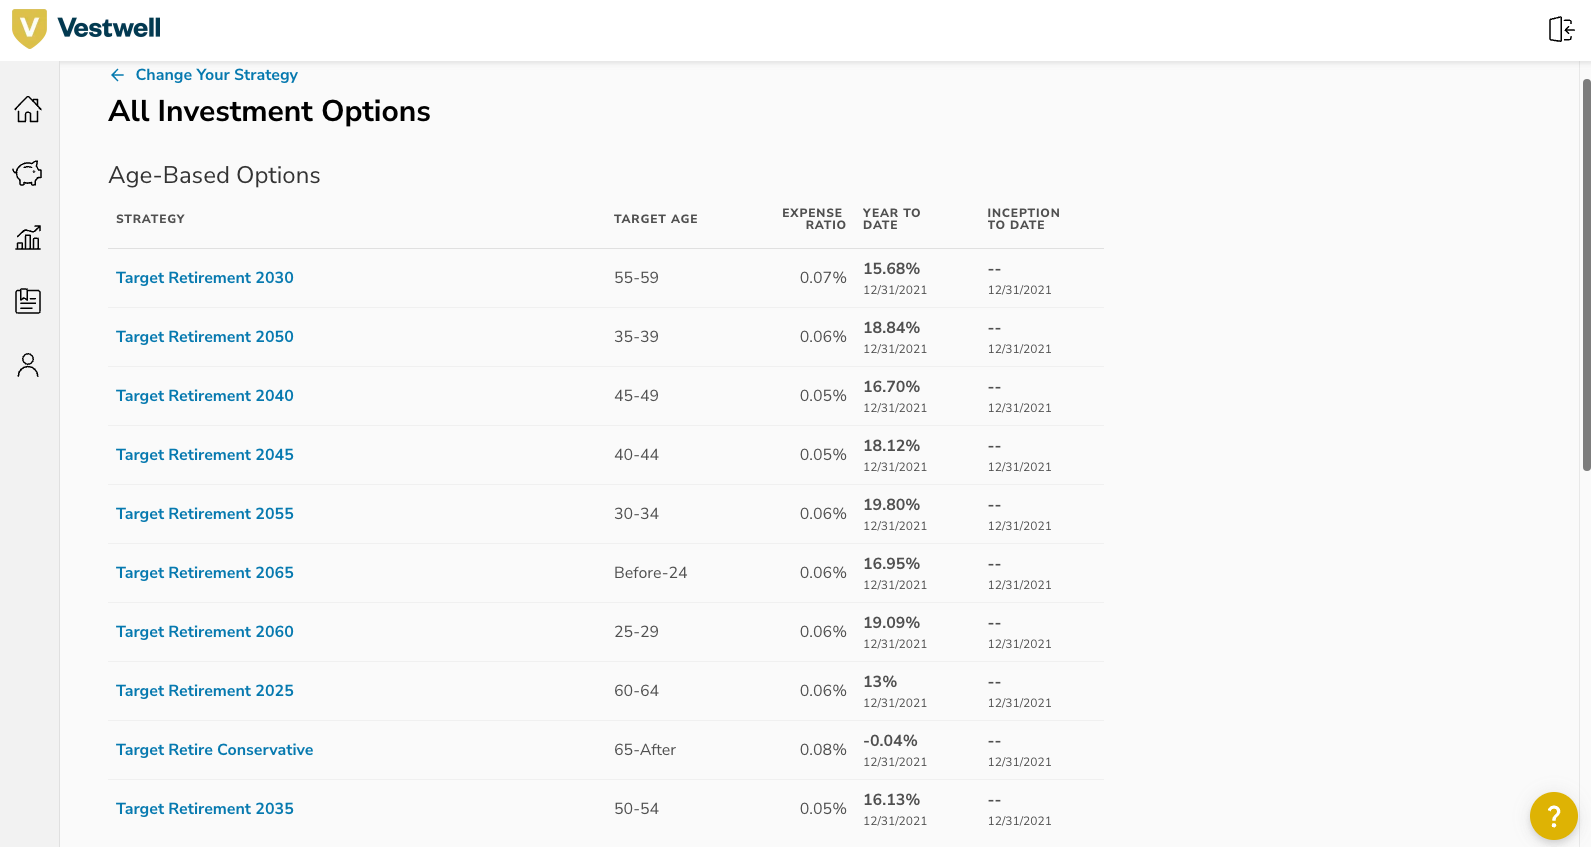  This is a screenshot of the investment options breakdown